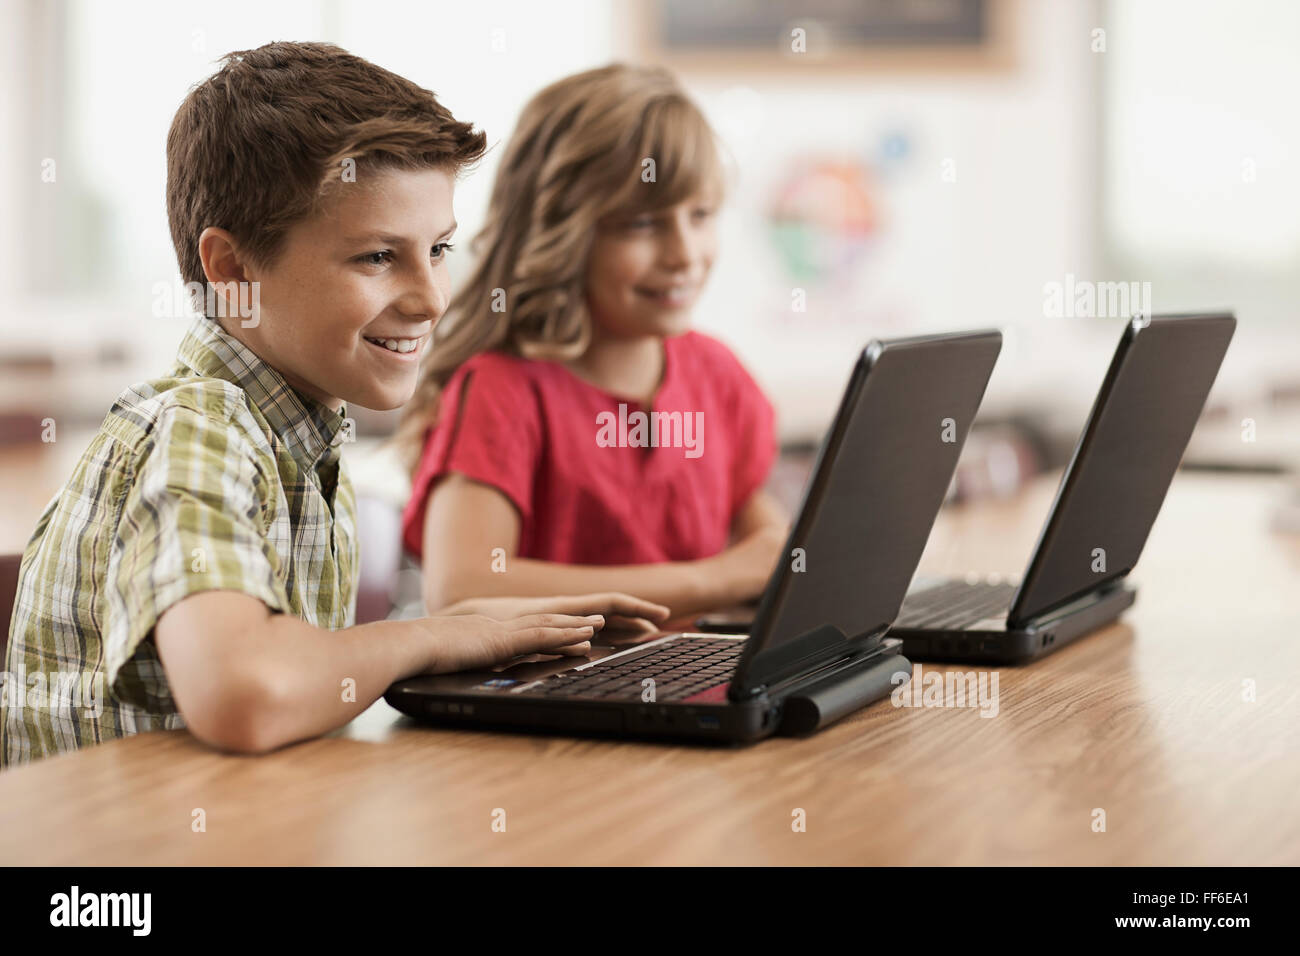 Two children seated at desks in class using laptop computers. Stock Photo